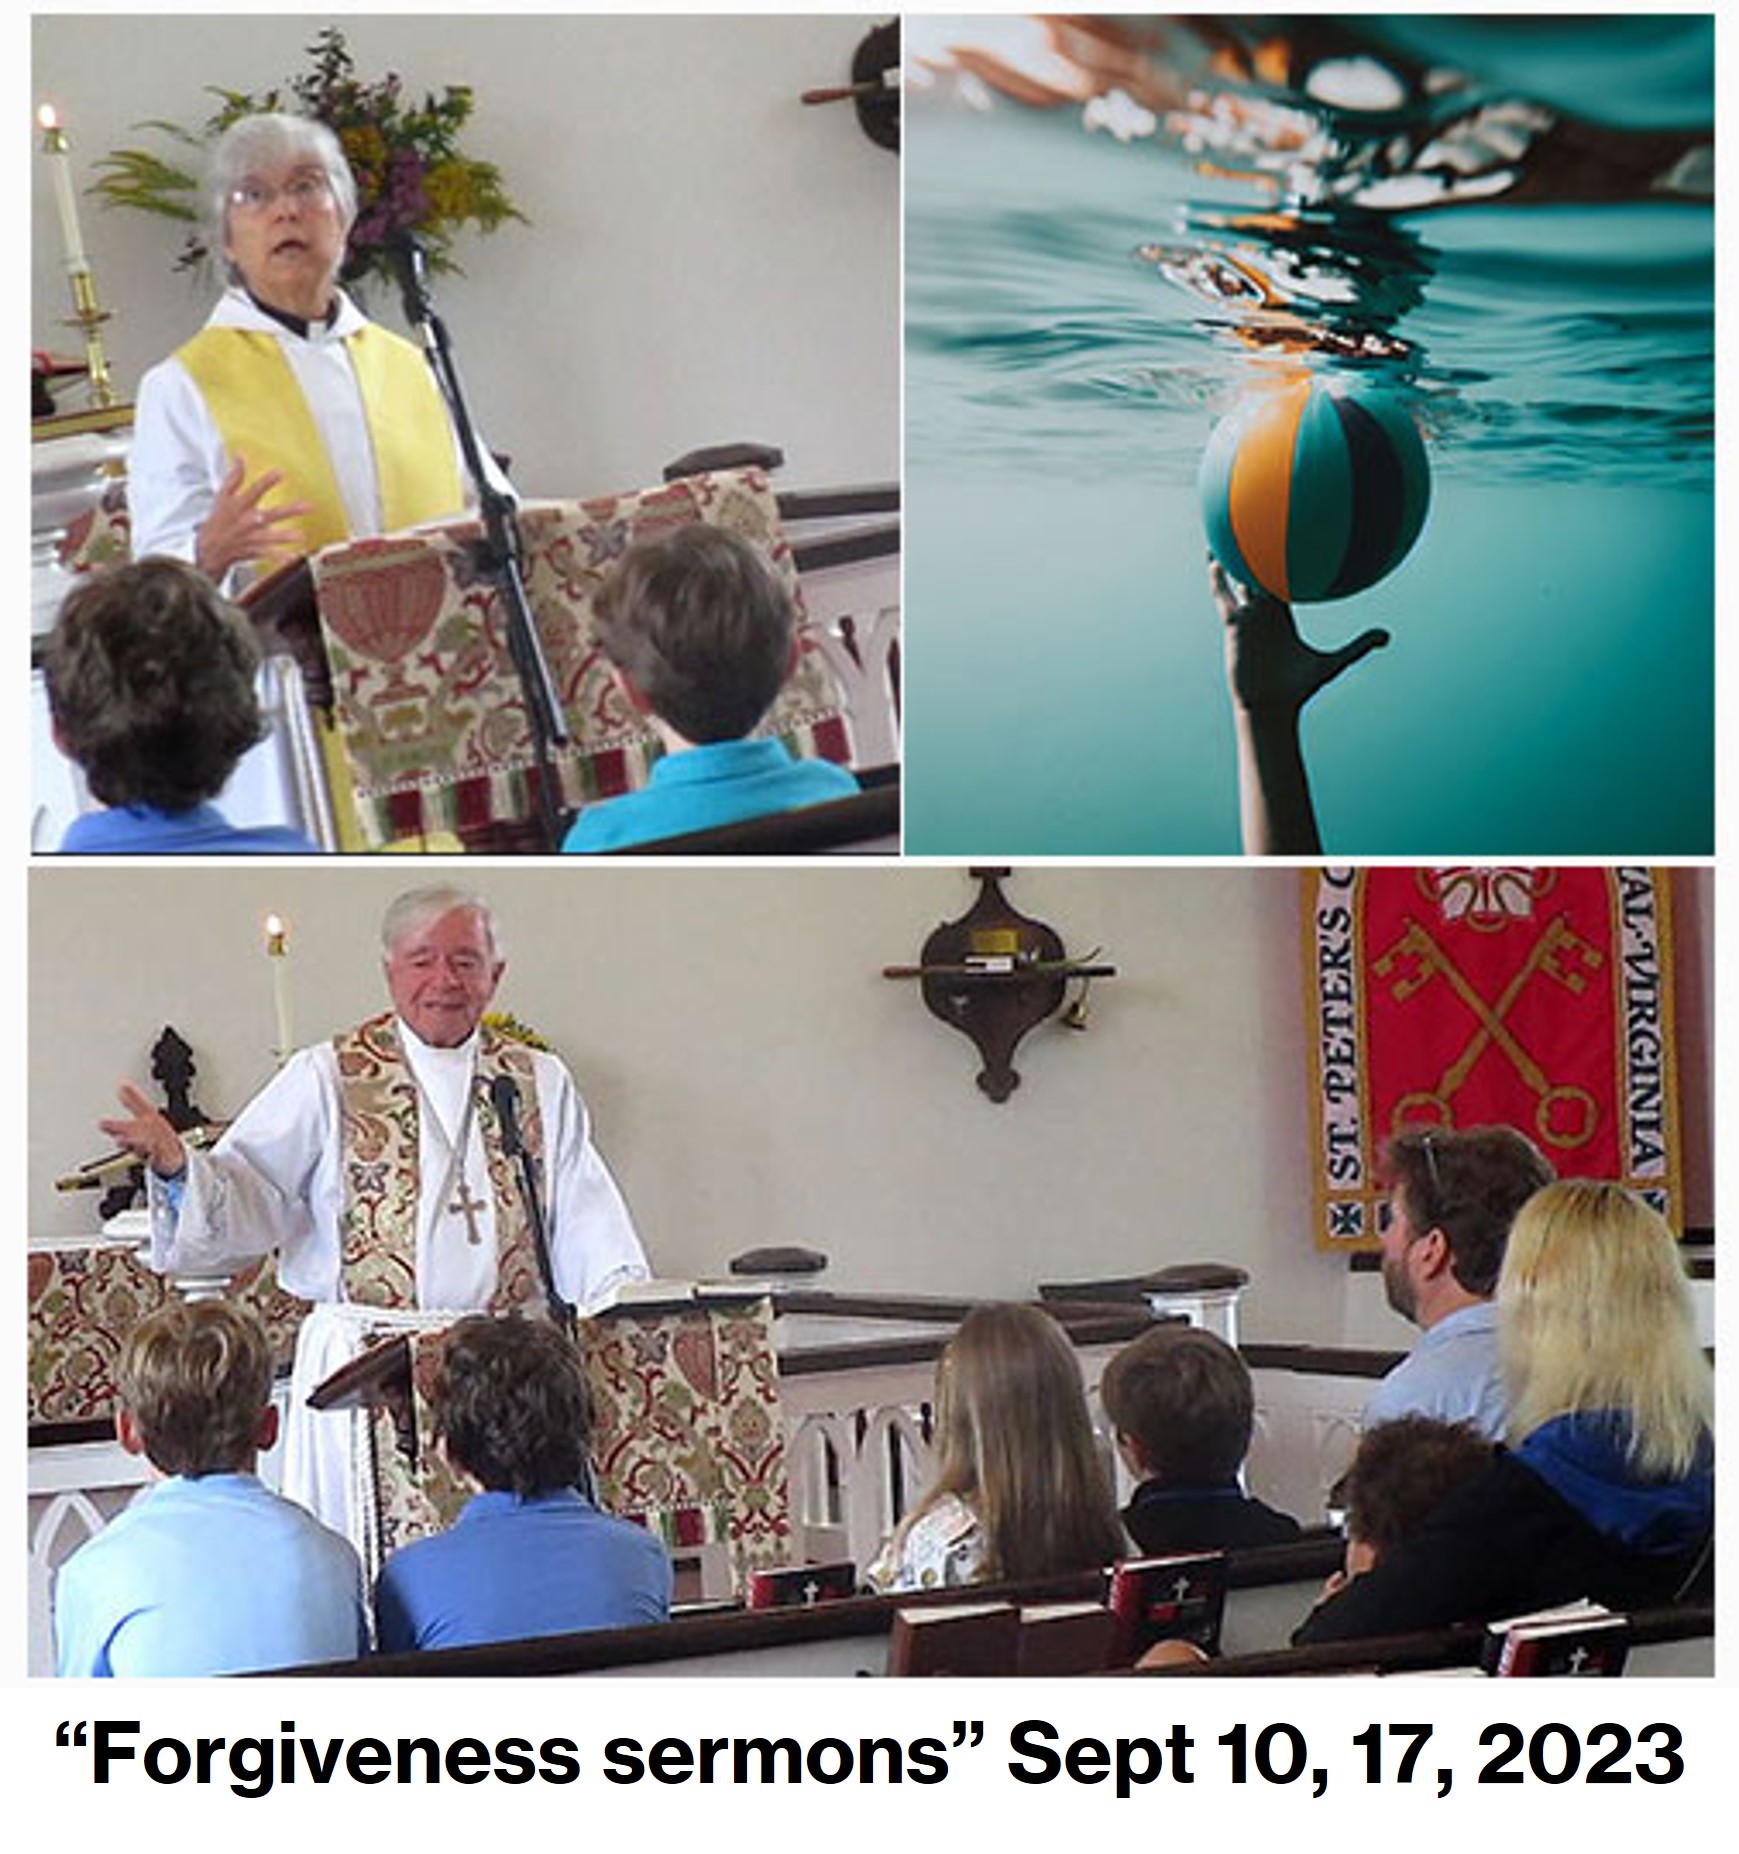 9-10 and 09-17 Forgiveness sermons from Tom and Catherine